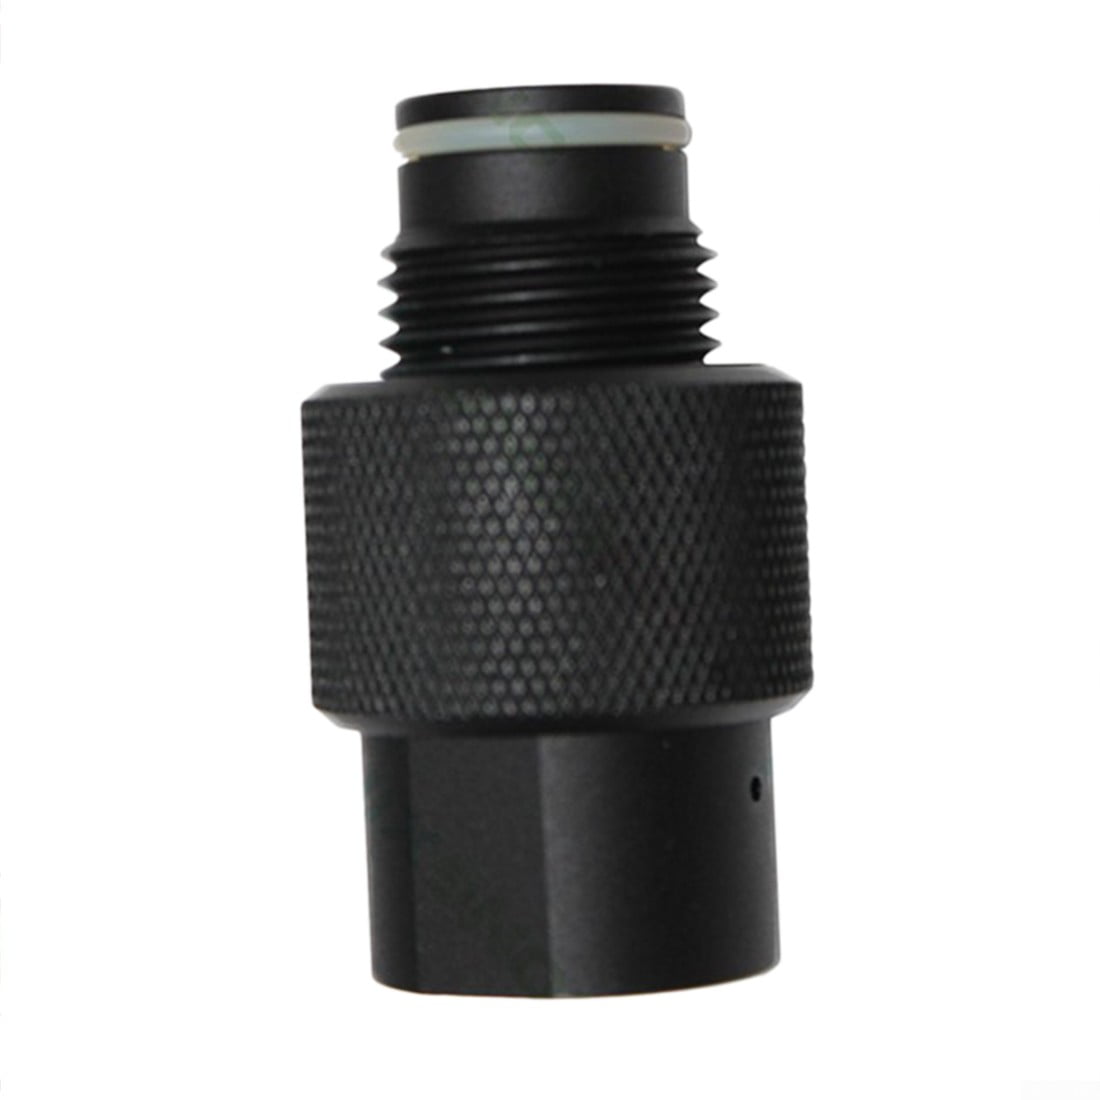 Gas Tank Adapter HPAT Adaptor Airsoft Paintball In-line Filling Outdoor Valve 